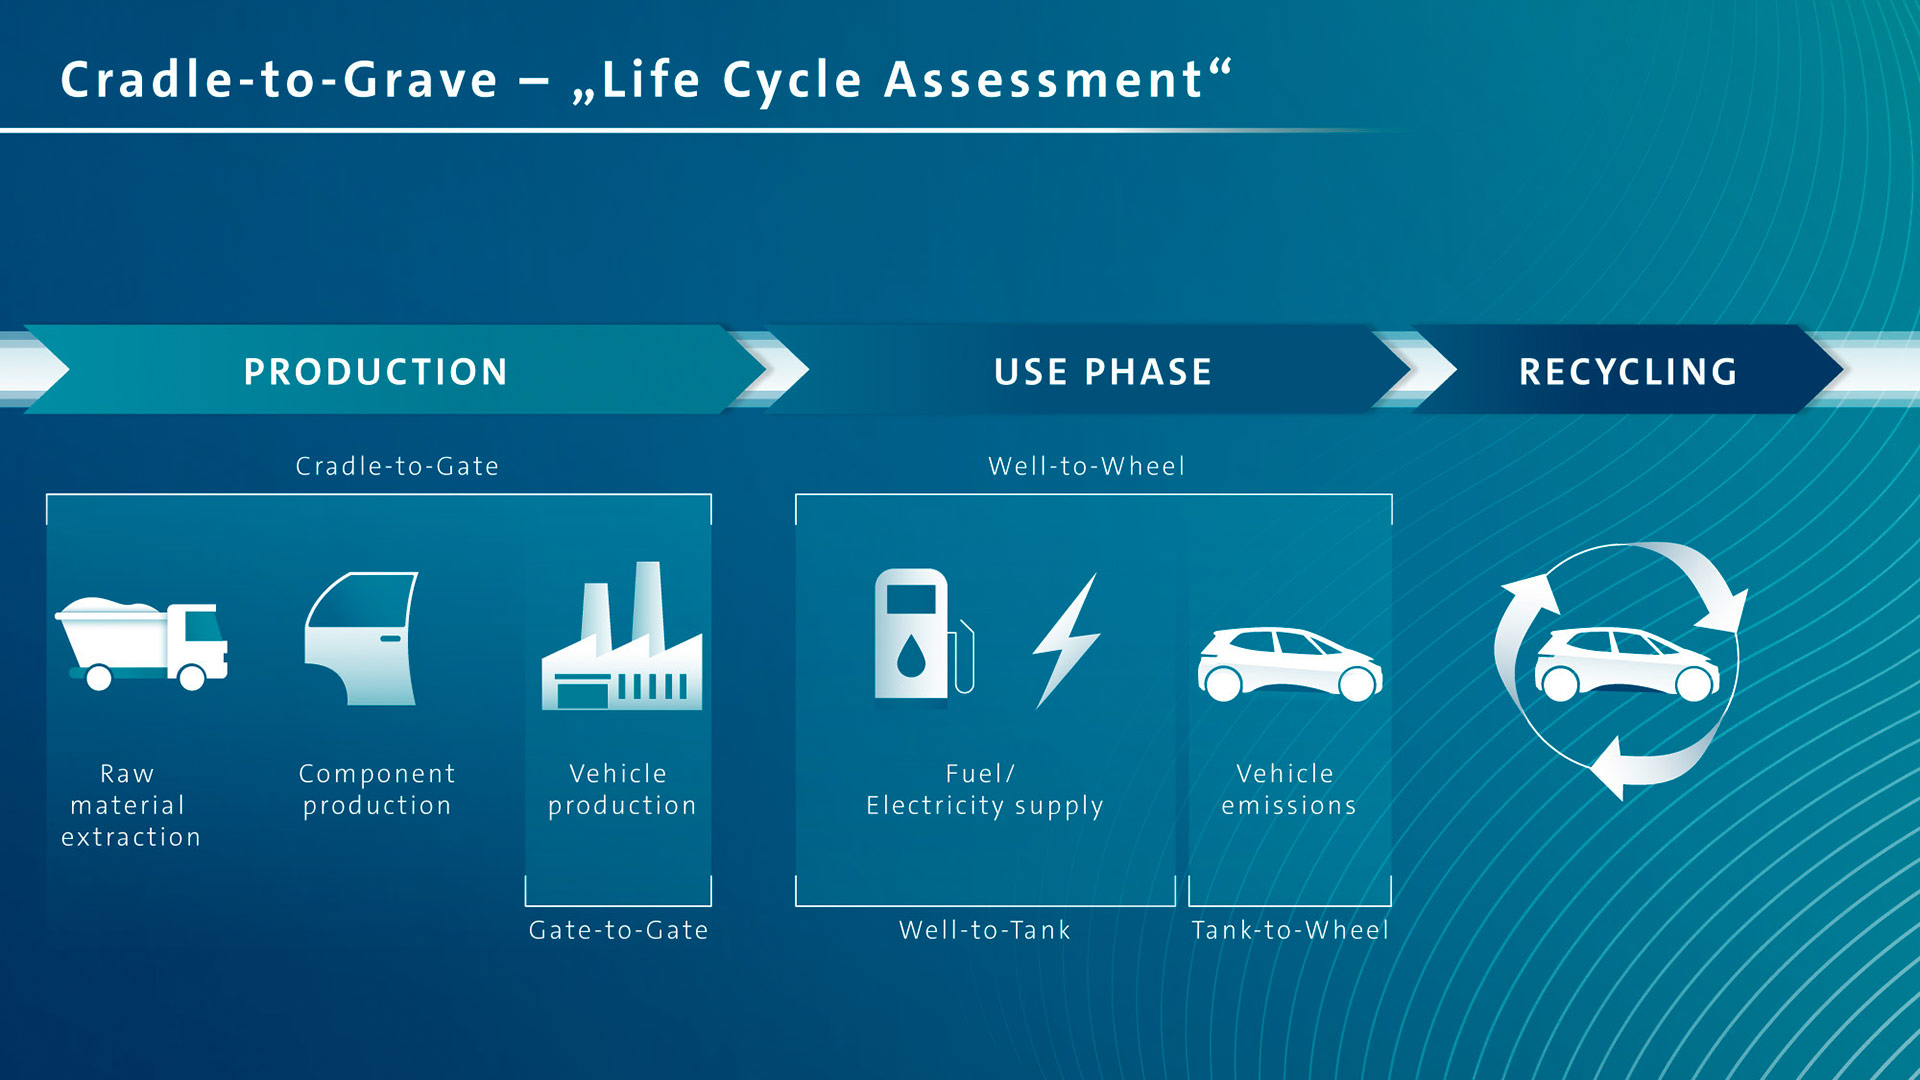 Carbon Life Cycle Of Electric Vehicles Synonym - Dolley Ingeberg